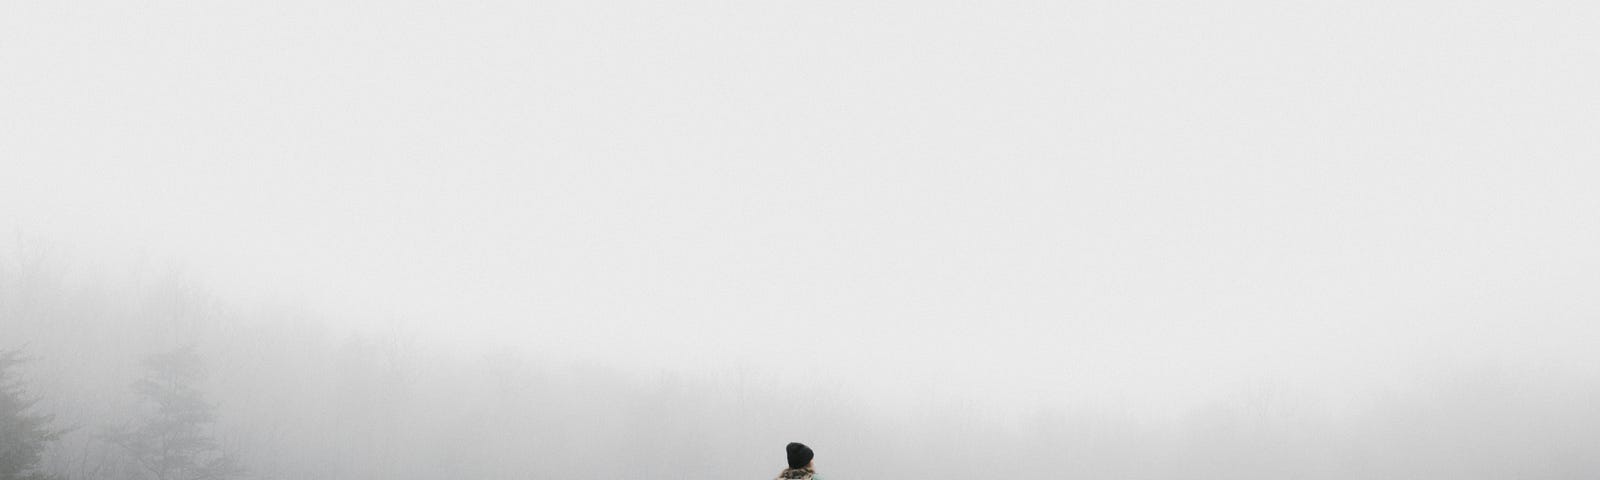 A backpacker stands in front of a forest shrouded in fog